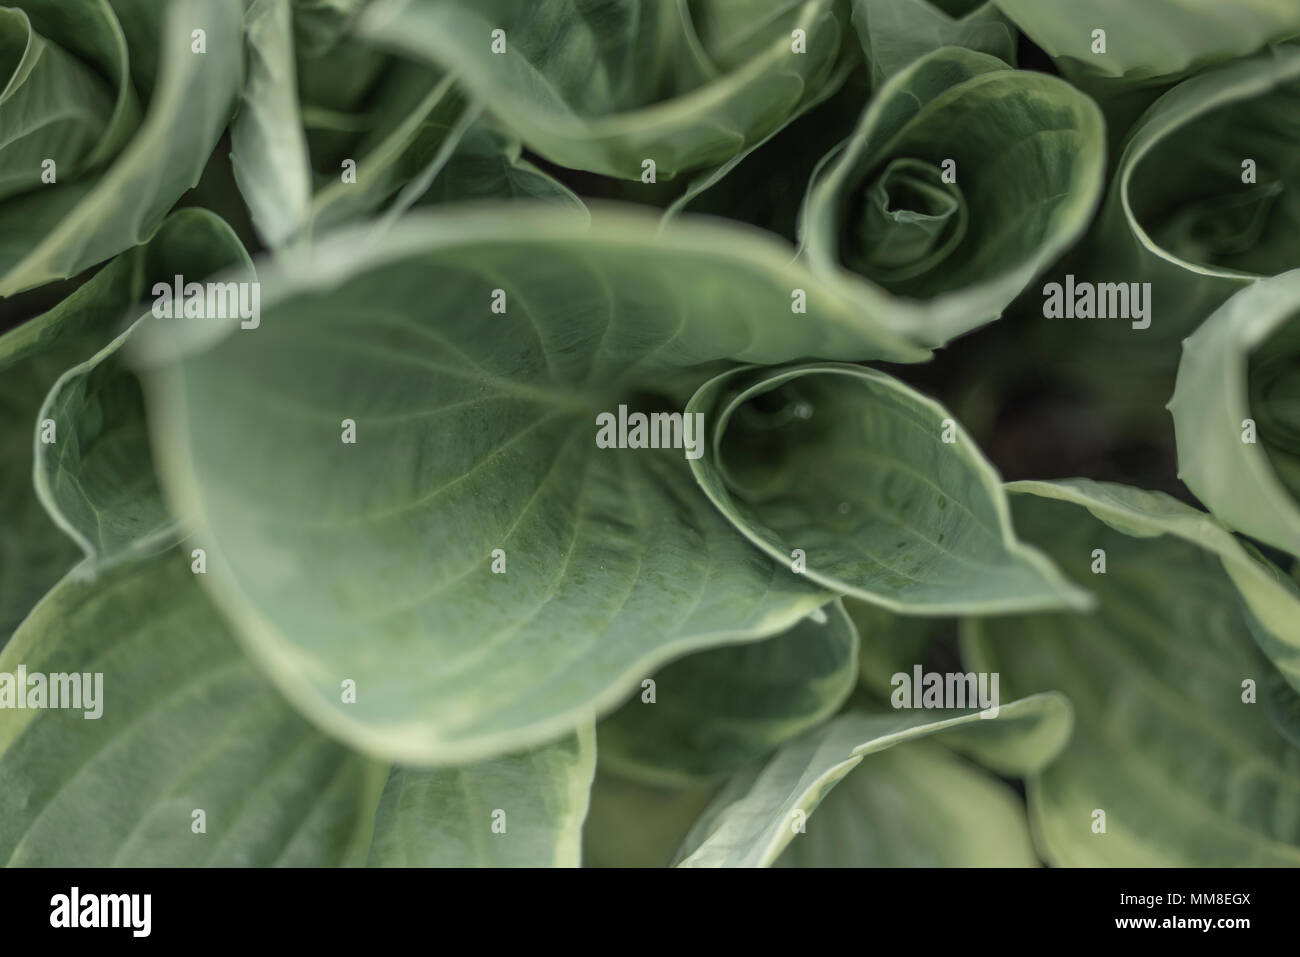 Lush Green leaves of a Hosta Plant. PHILLIP ROBERTS Stock Photo